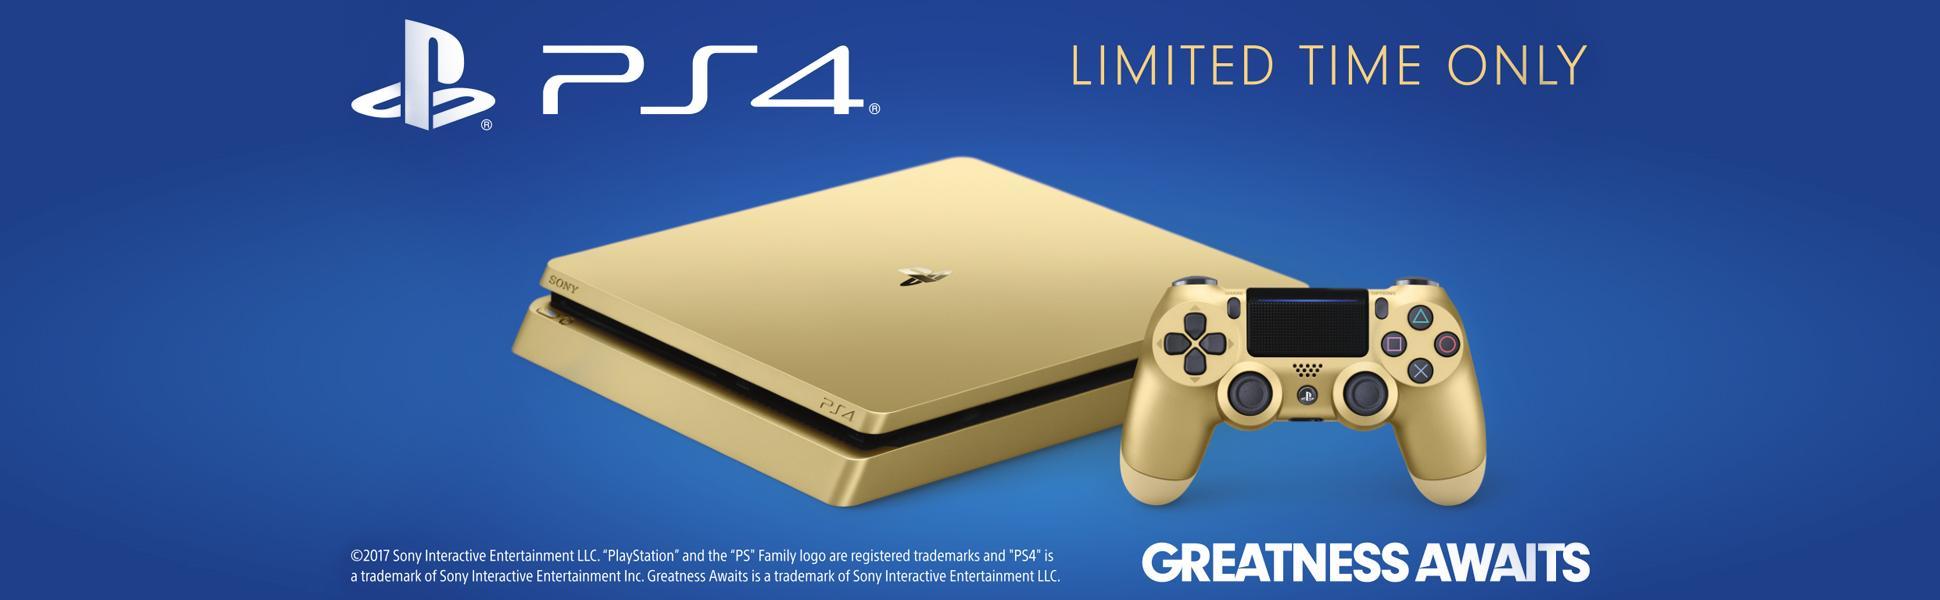 PlayStation 4 Slim 1TB Gold Console Discontinued